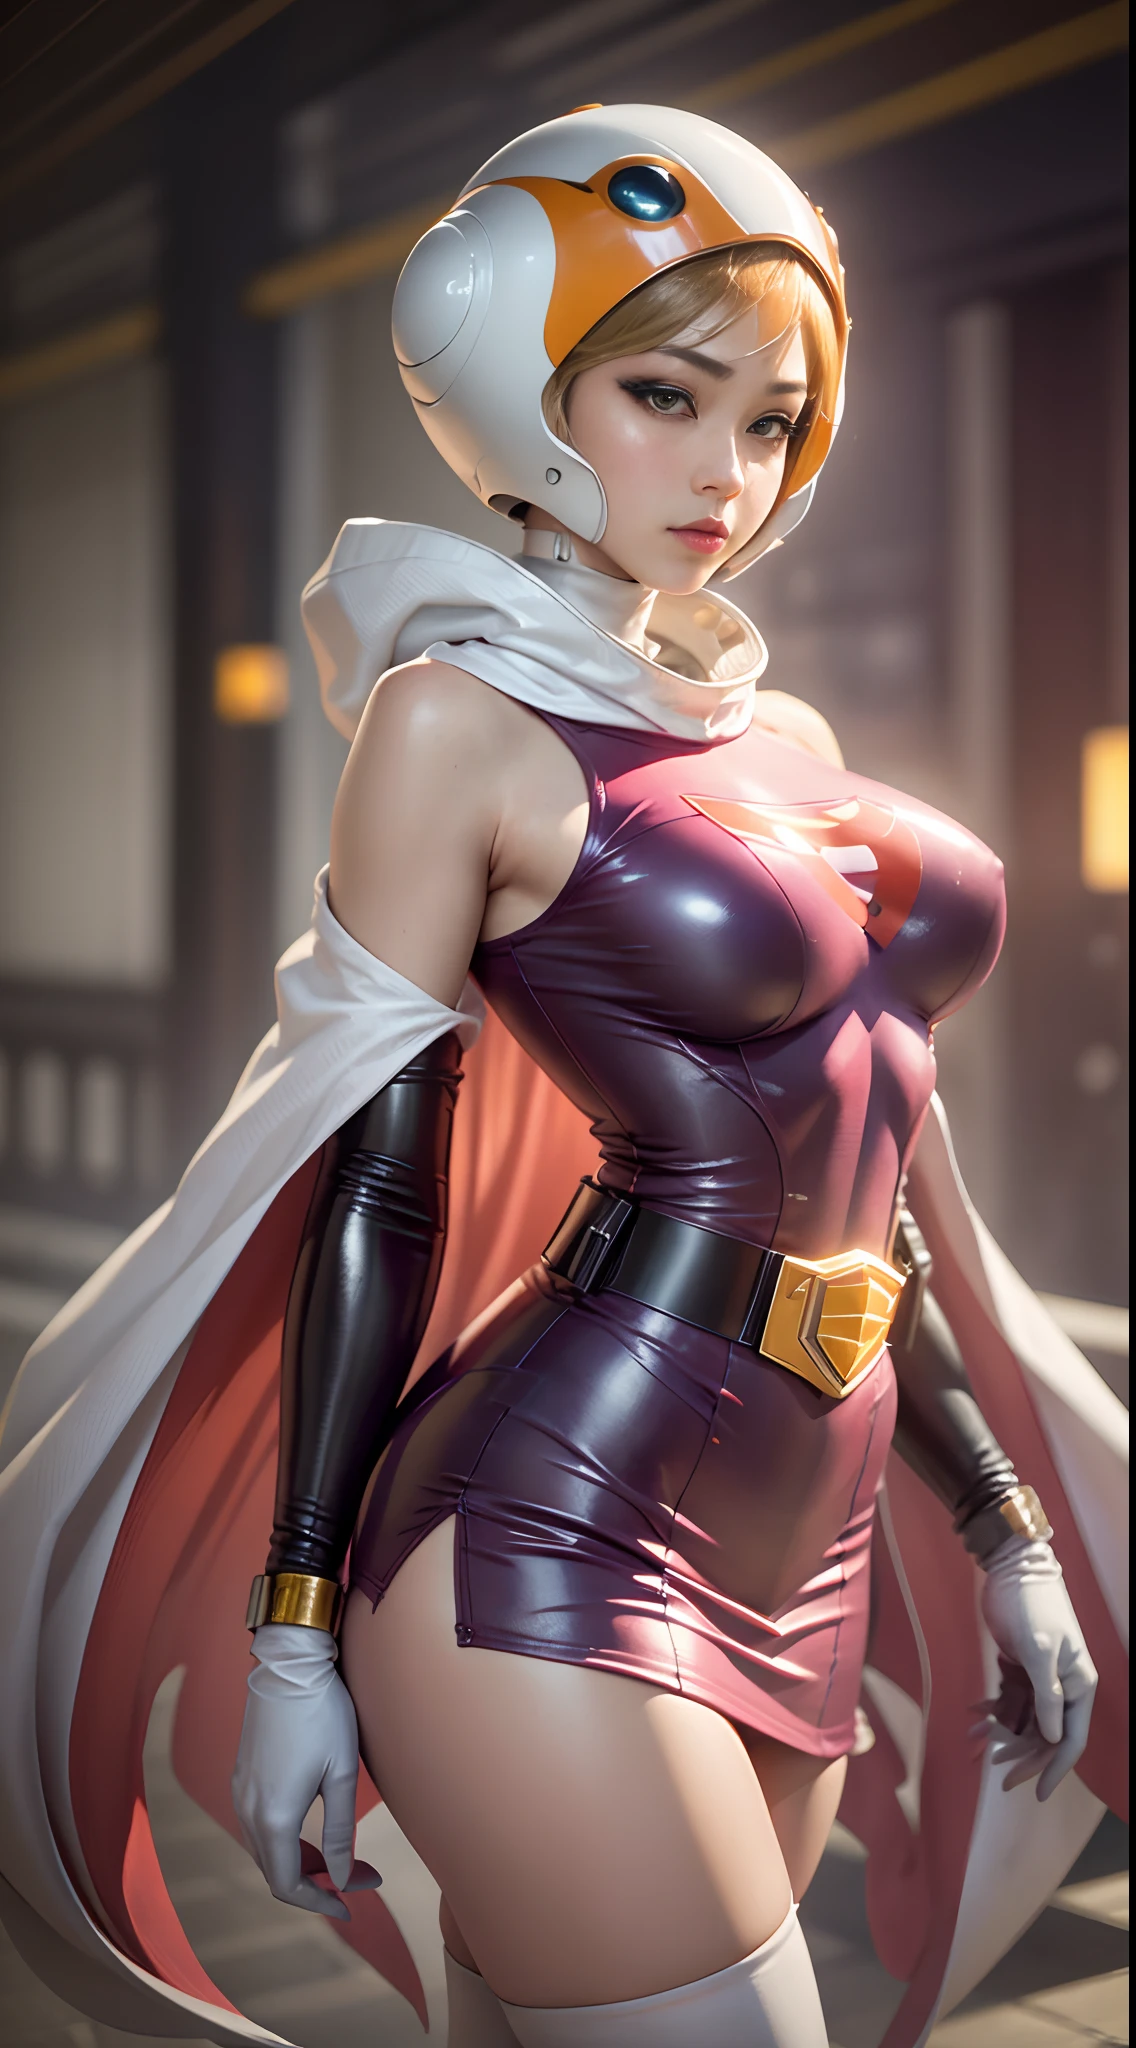 frontage、the pose、gazing at viewer、BREAK、 Years_CLASSIC_jun_Gatchaman_ownwaifu、www.ownwaifu.featuring、 Long、breastsout、verd s eyes、s lips、mideum breasts、a blond、lipstickakeup、 gloves、cloaks、helmets、a belt、elbow groves、white glove、masks、skirt by the、leotard、space suits、white legwear、pink  dress、superhero、body suit、 、、Official Art、Highly detailed CG Unity 8k wallpapers、Perfect Lighting、colourfull、Bright front lighting、shinny skin、(​masterpiece:1.0)、(top-quality:1.0)、超A high resolution、4K、Ultra-detail、a picture、8K、HDR、hight resolution、(absurderes:1.2)、Kodak portra 400、film grains、blurry backround、(bokeh dof:1.2)、lensflare、(vivd colour:1.2)、professional photograpy、(Beautiful face:1.5)、